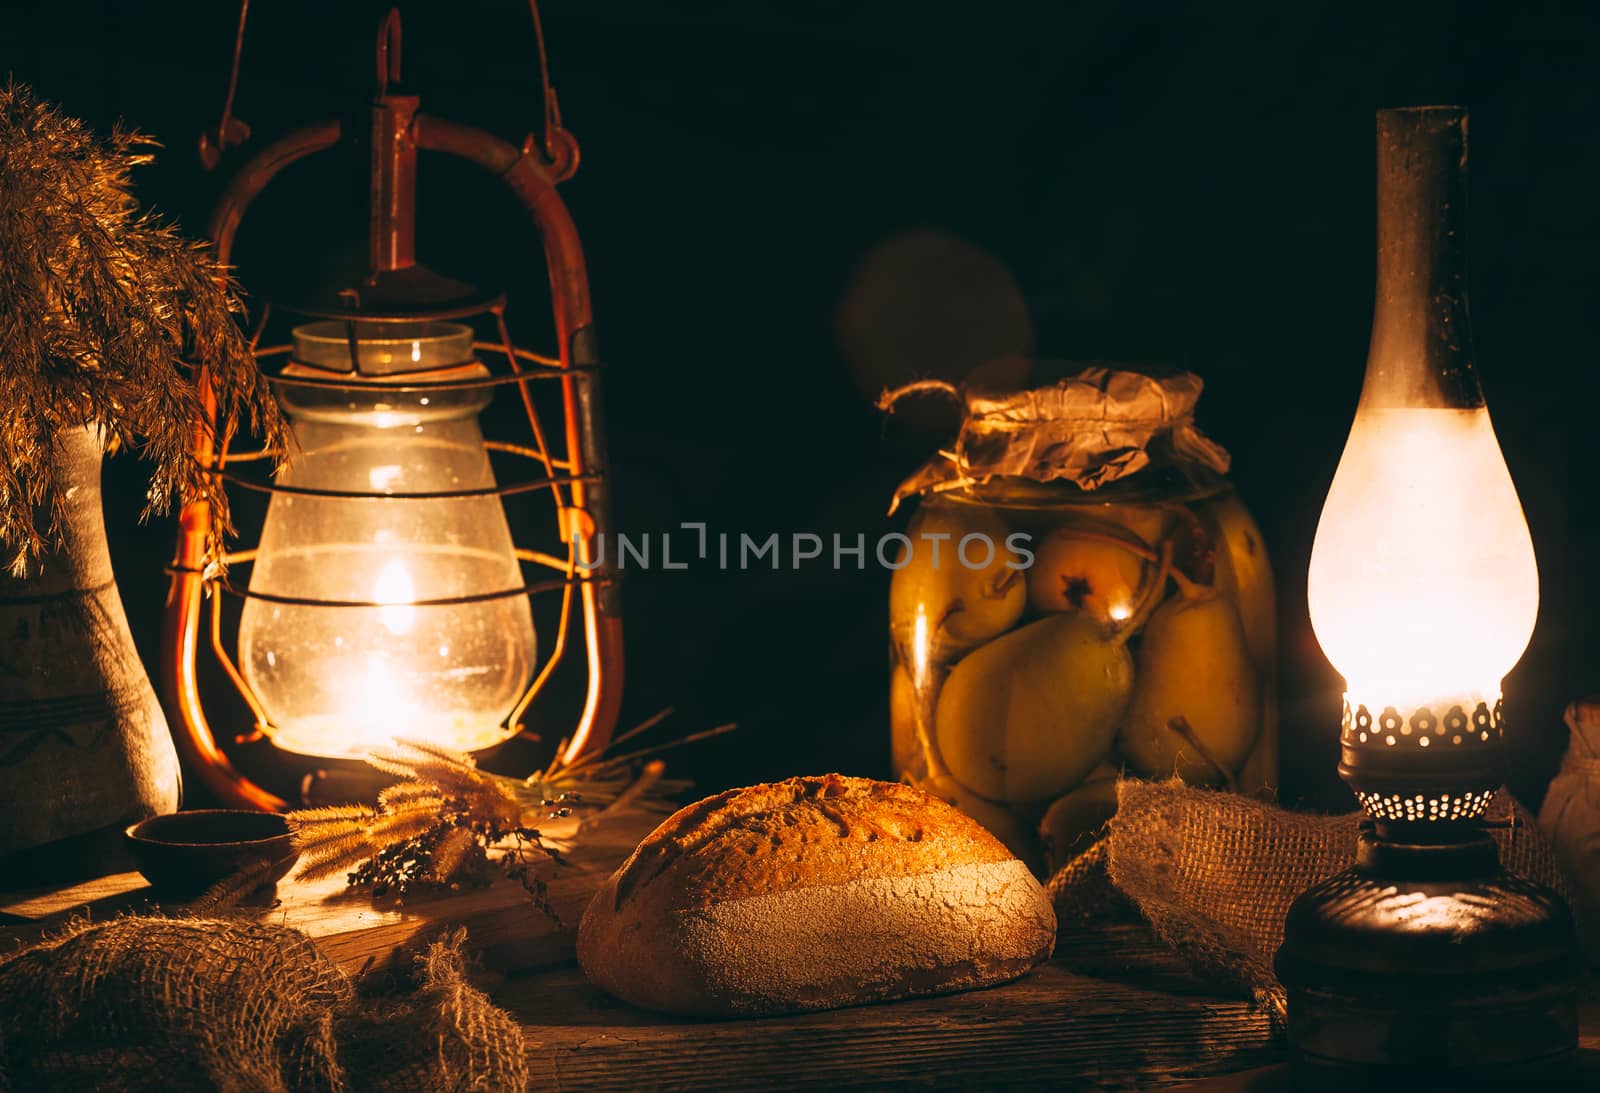 Homemade baked bread on a wooden board in warm light from gas la by Opikanets